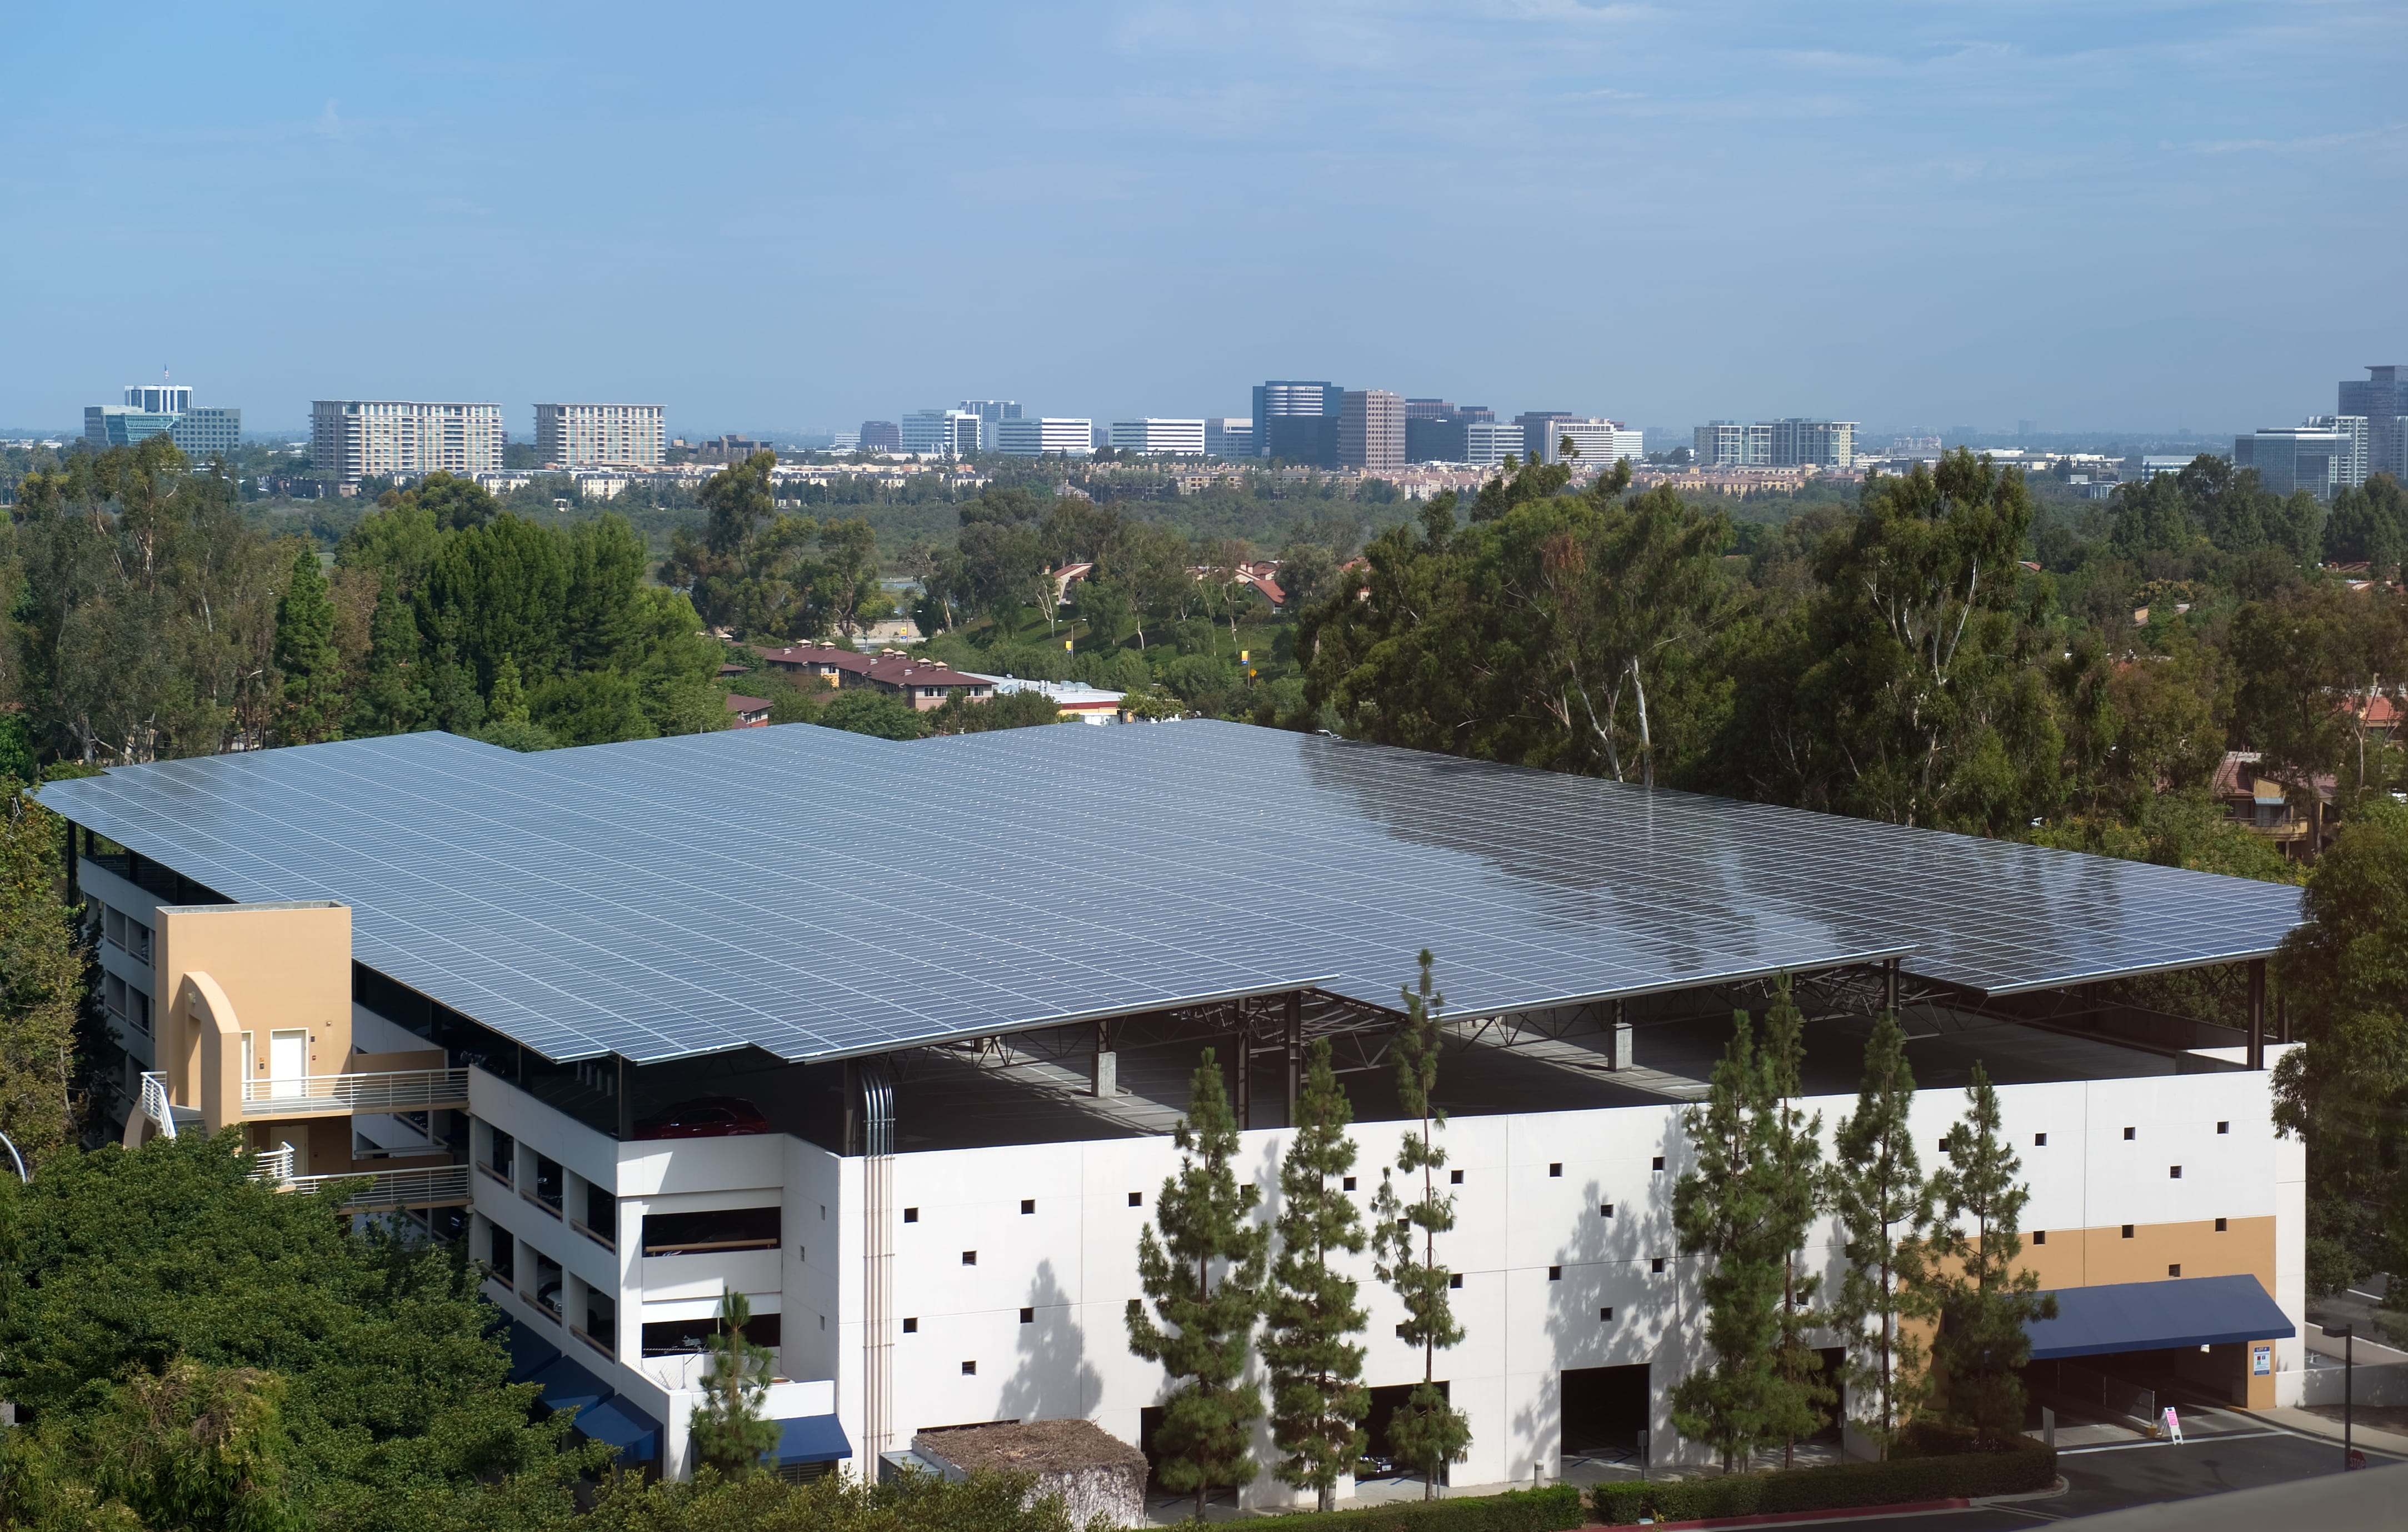 Solar panels cover the roof of UCI’s Student Center Parking Structure.